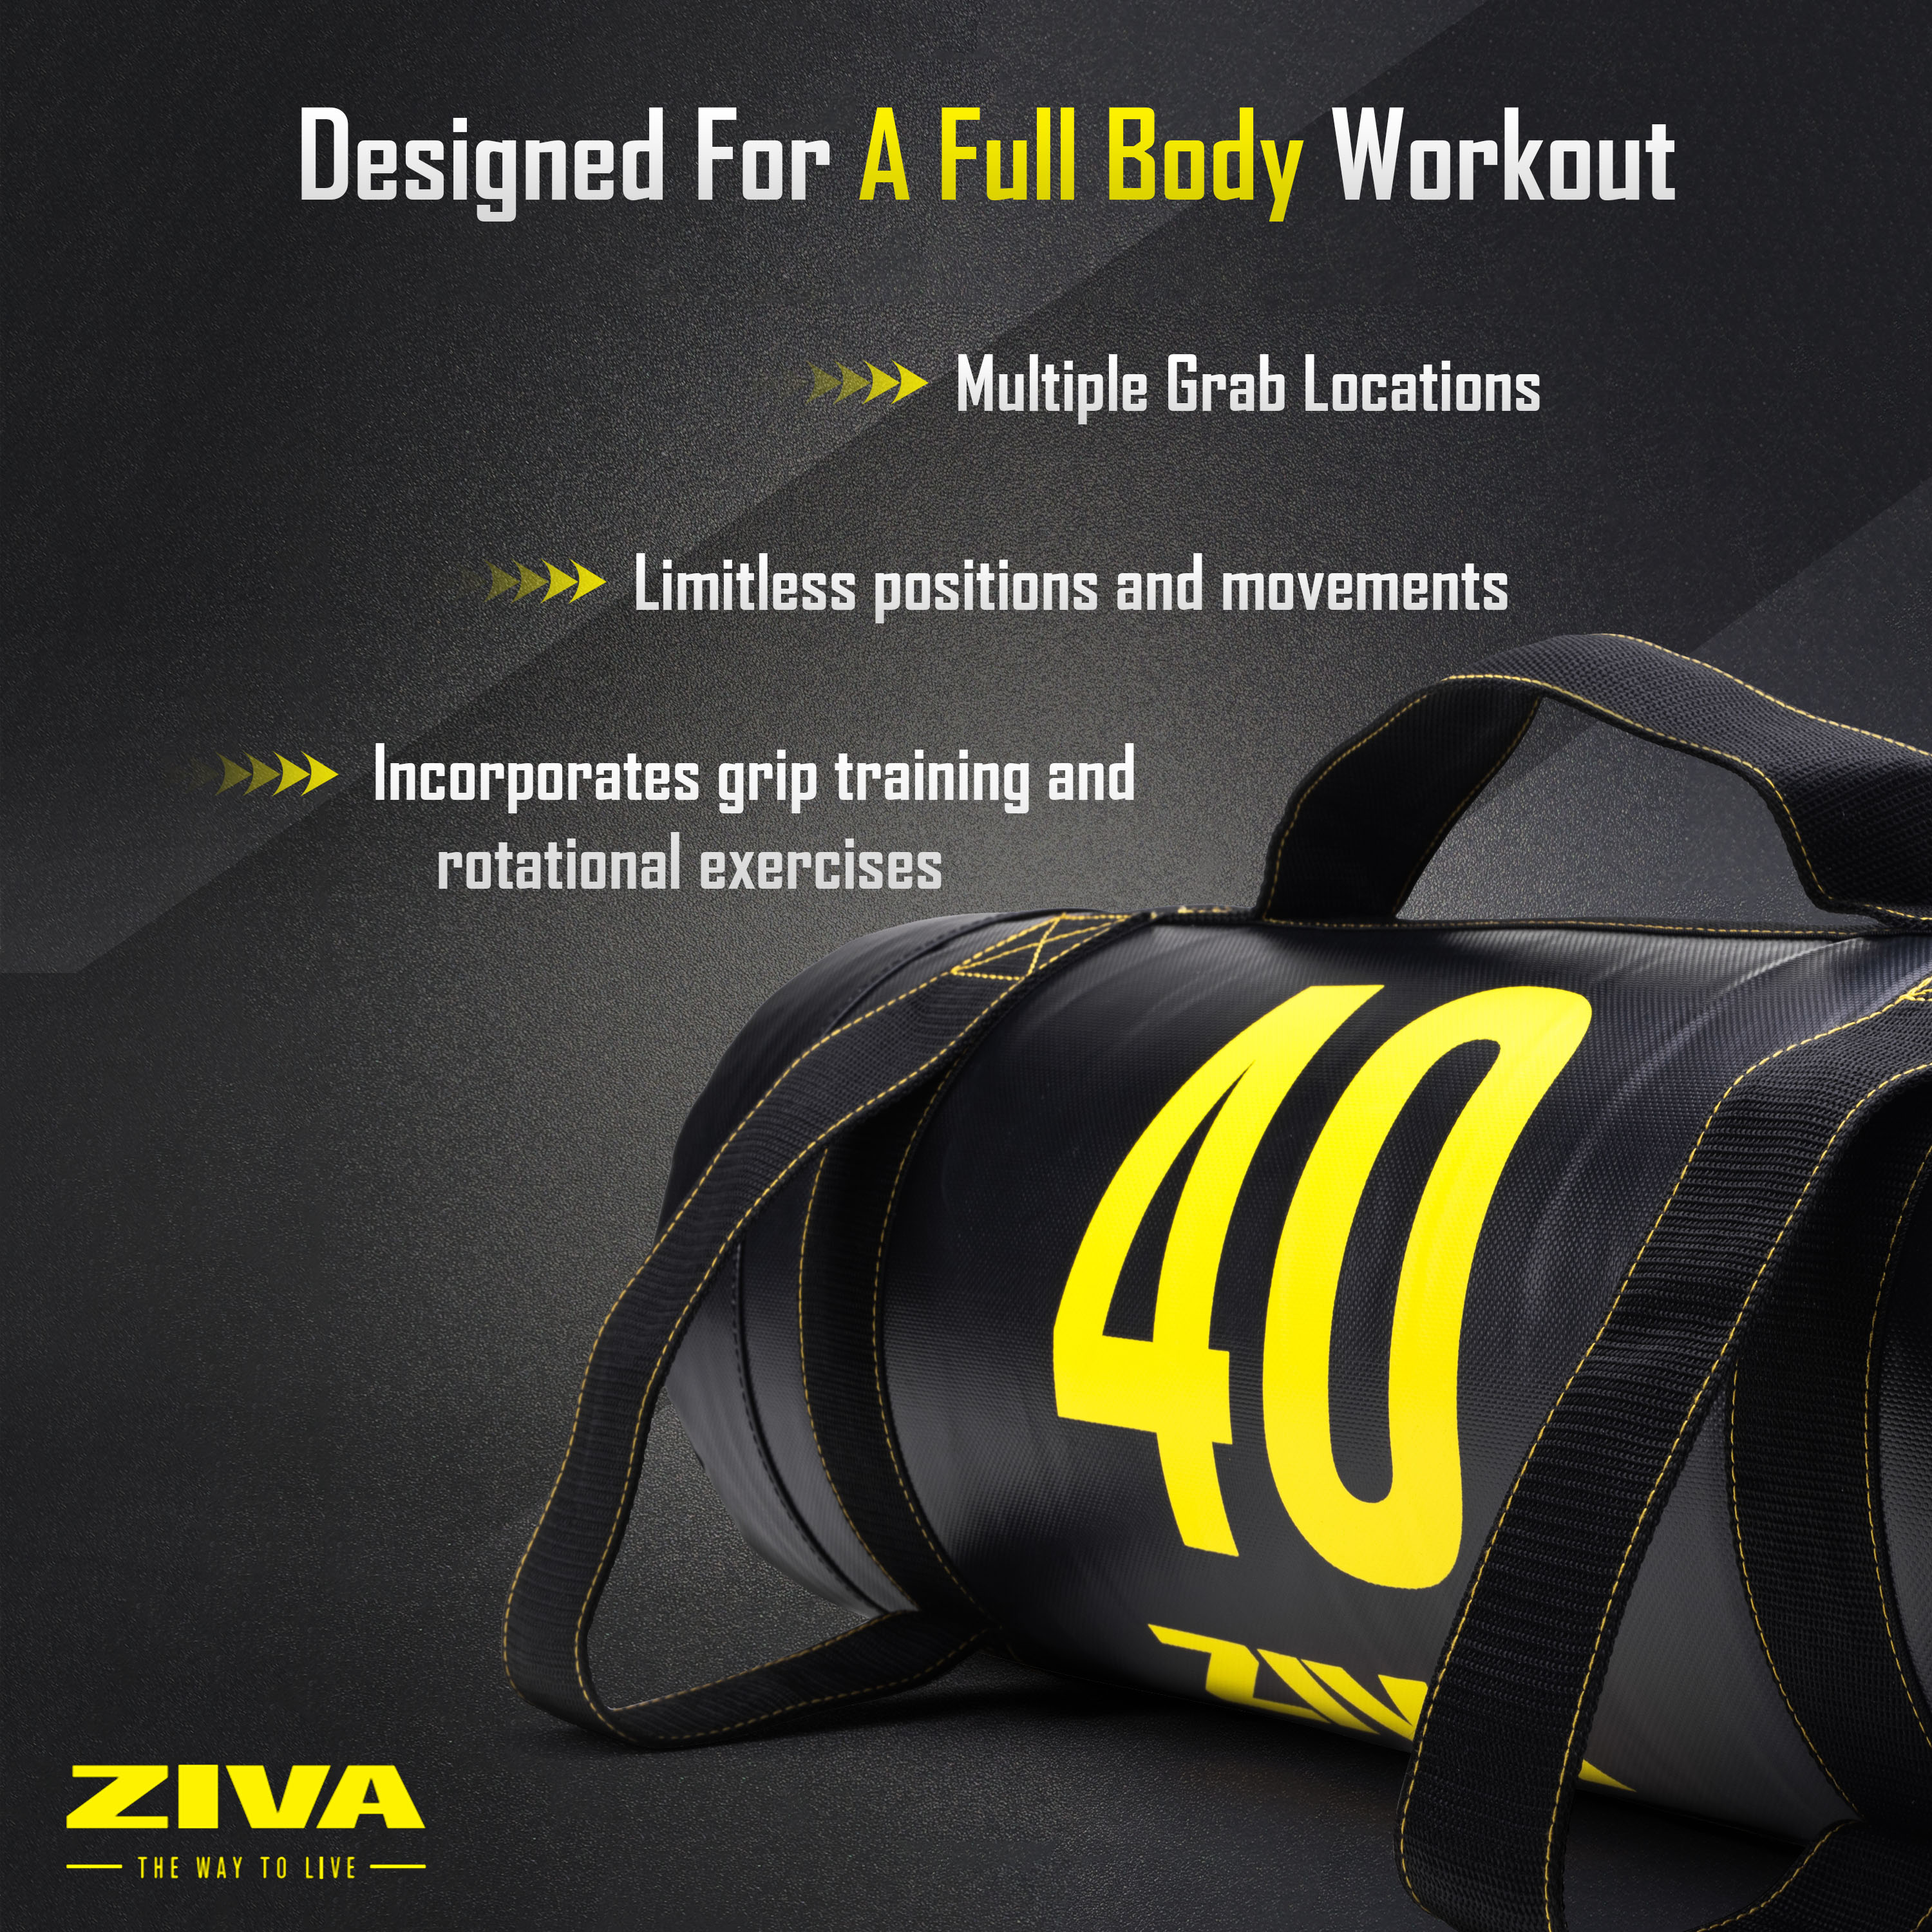 Designed for a full body workout. Multiple grab locations. Limitless positions and movements. Incorporates grip training and rotational exercises.